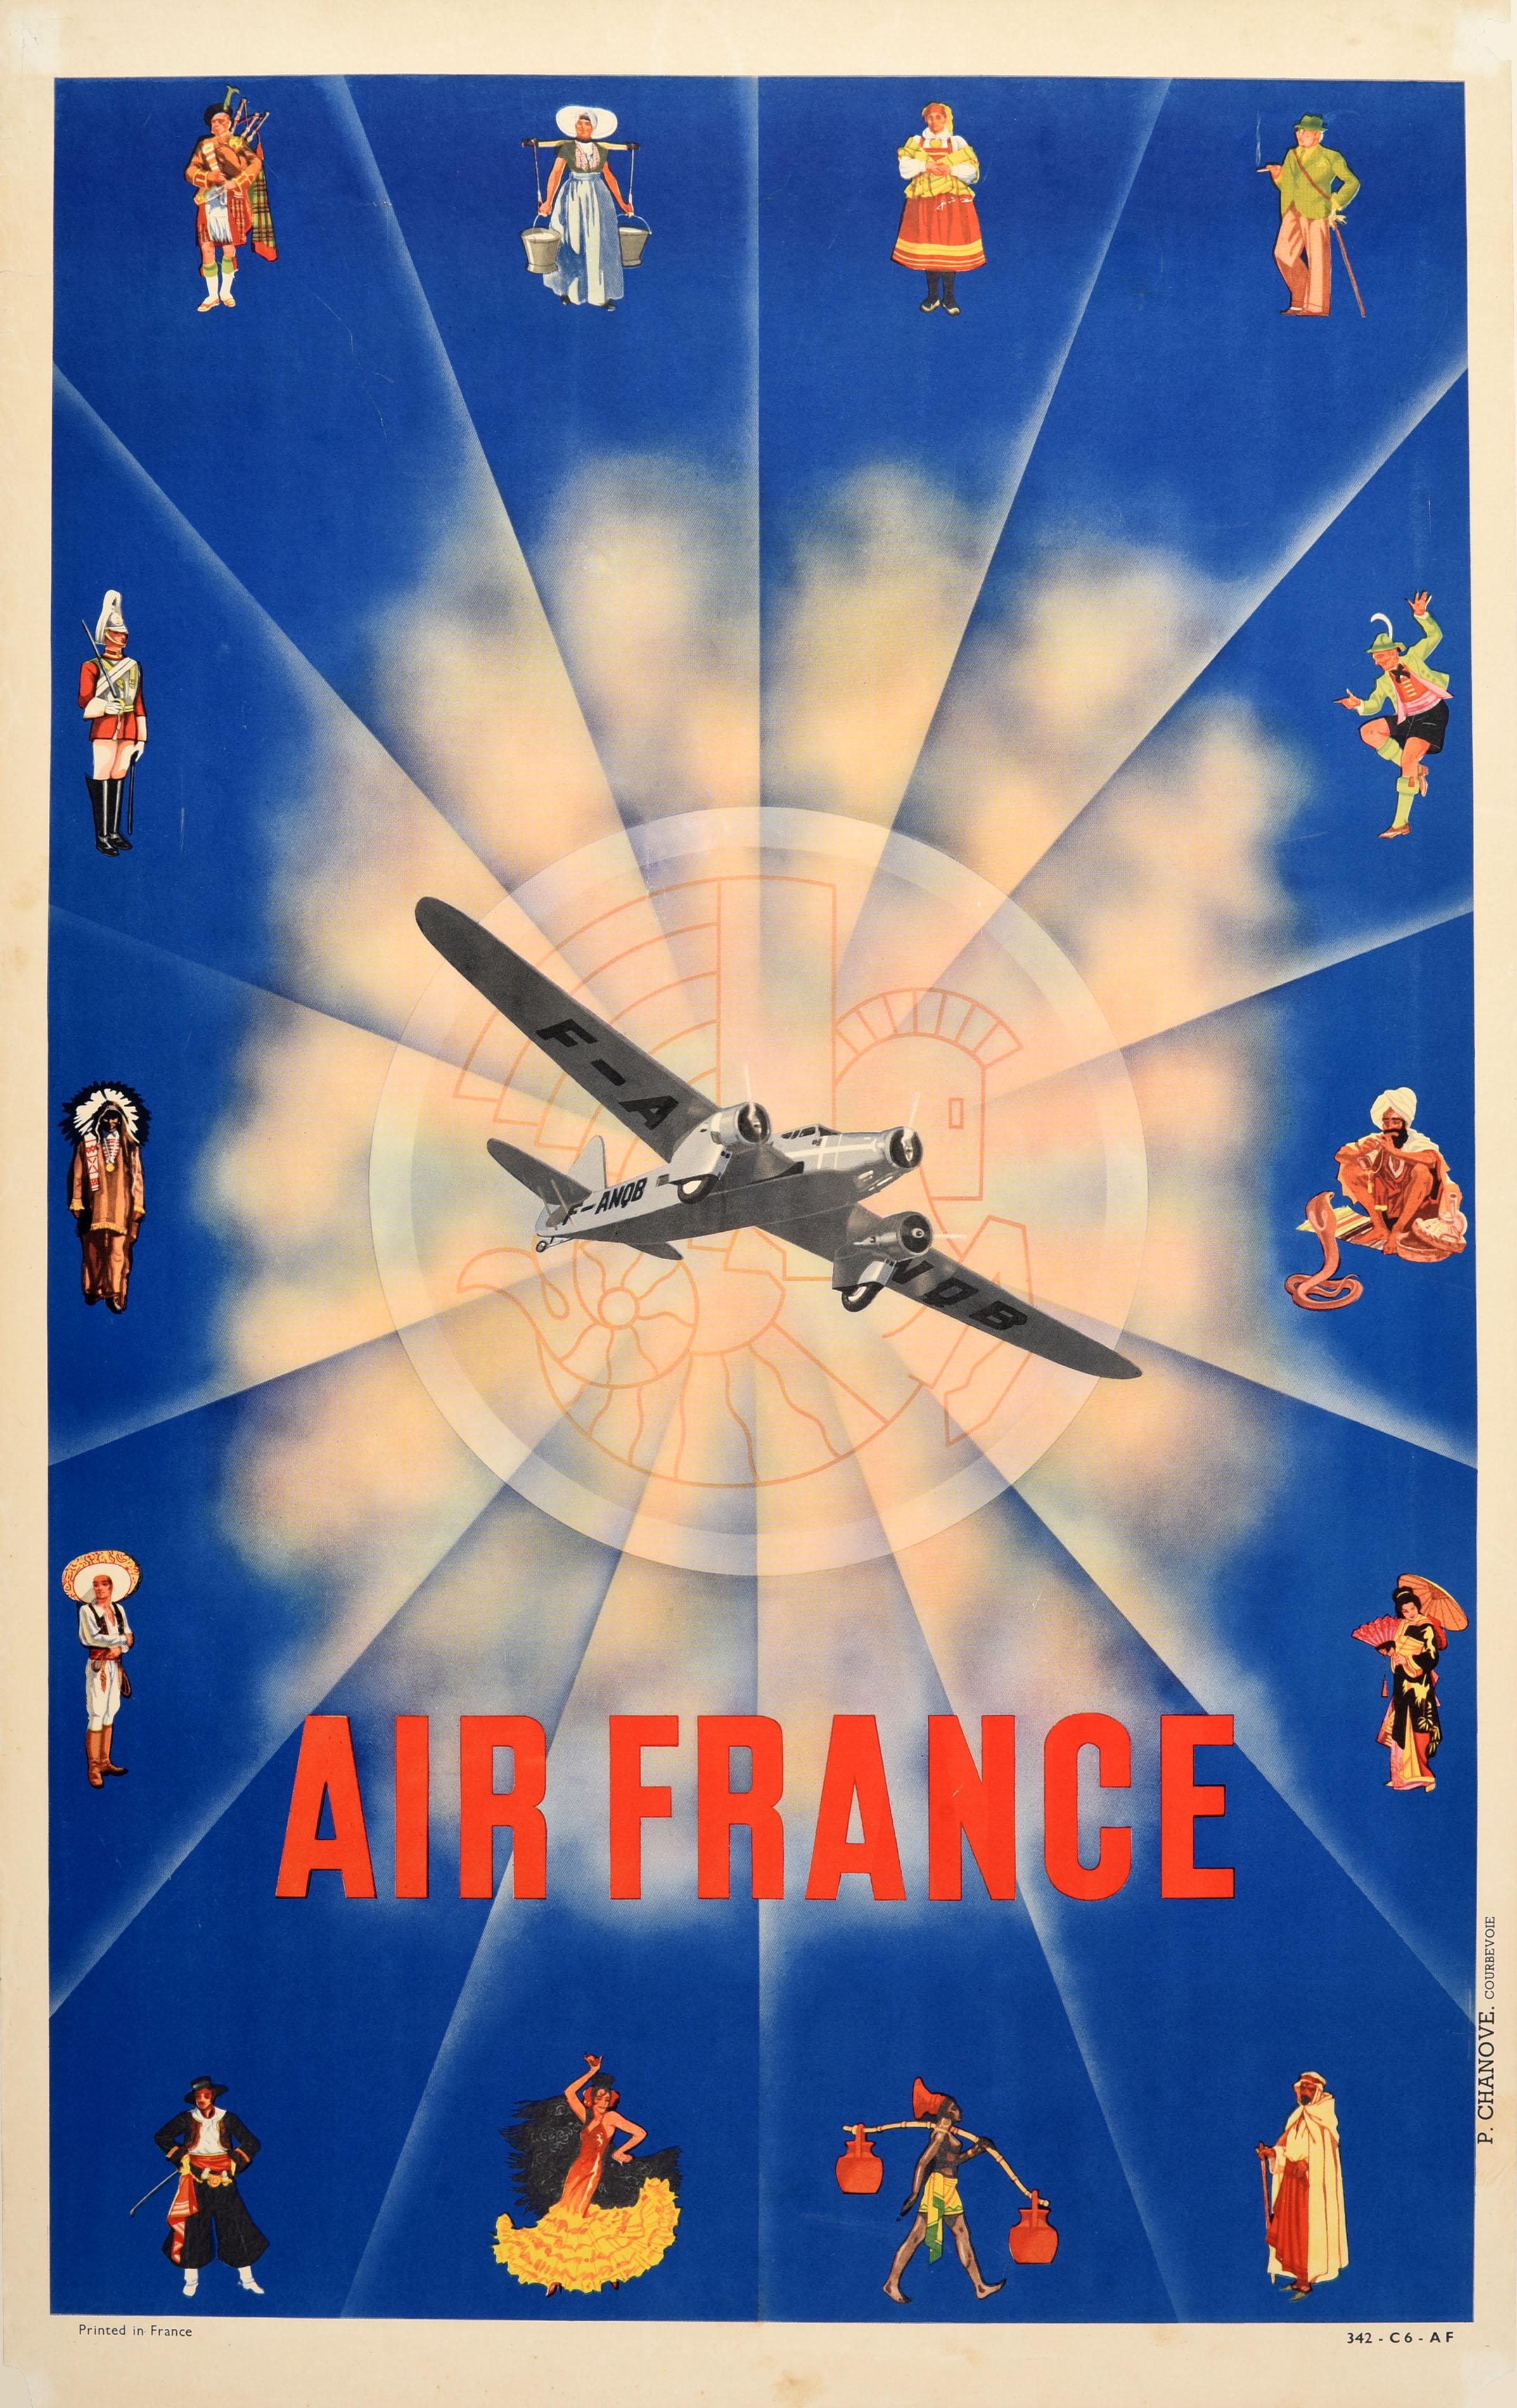 Unknown Print - Original Vintage Travel Advertising Poster Air France Art Deco National Clothing